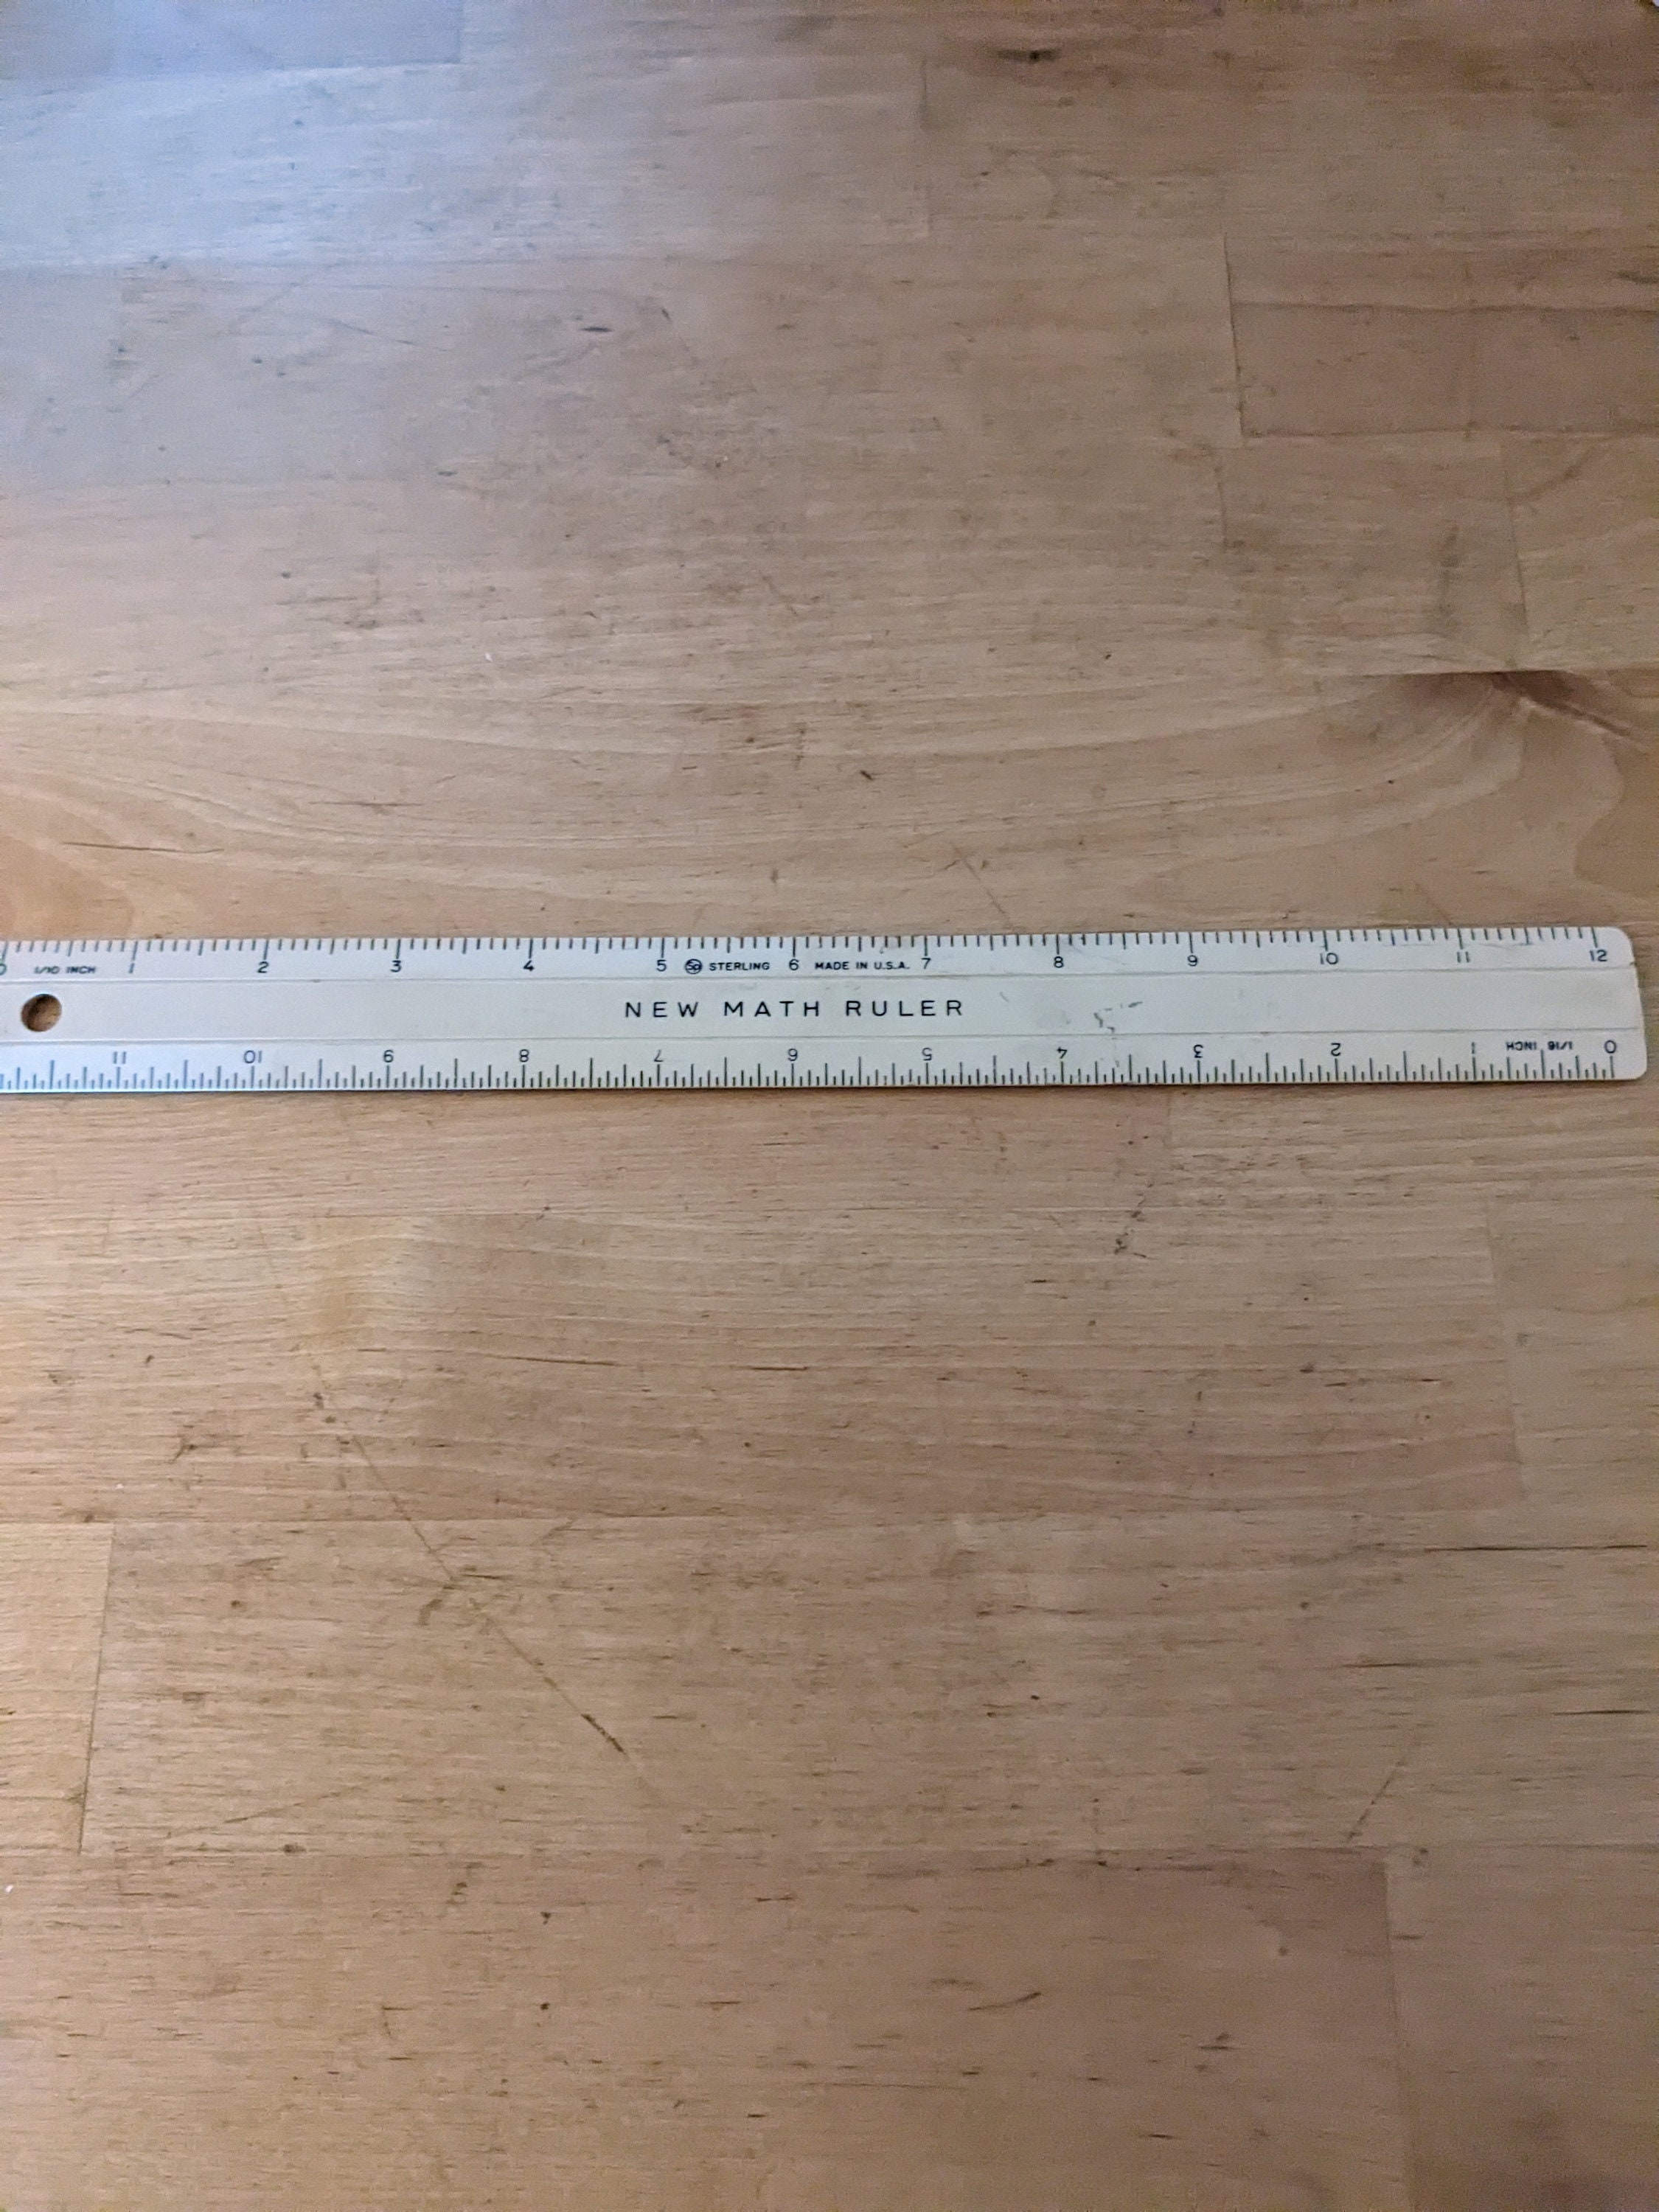 Dritz Super Seamer Ruler Clear Ruler With 1/8 Inch Markings for Sewing,  Quilting, and Crafts 1/4 Inch Thick 